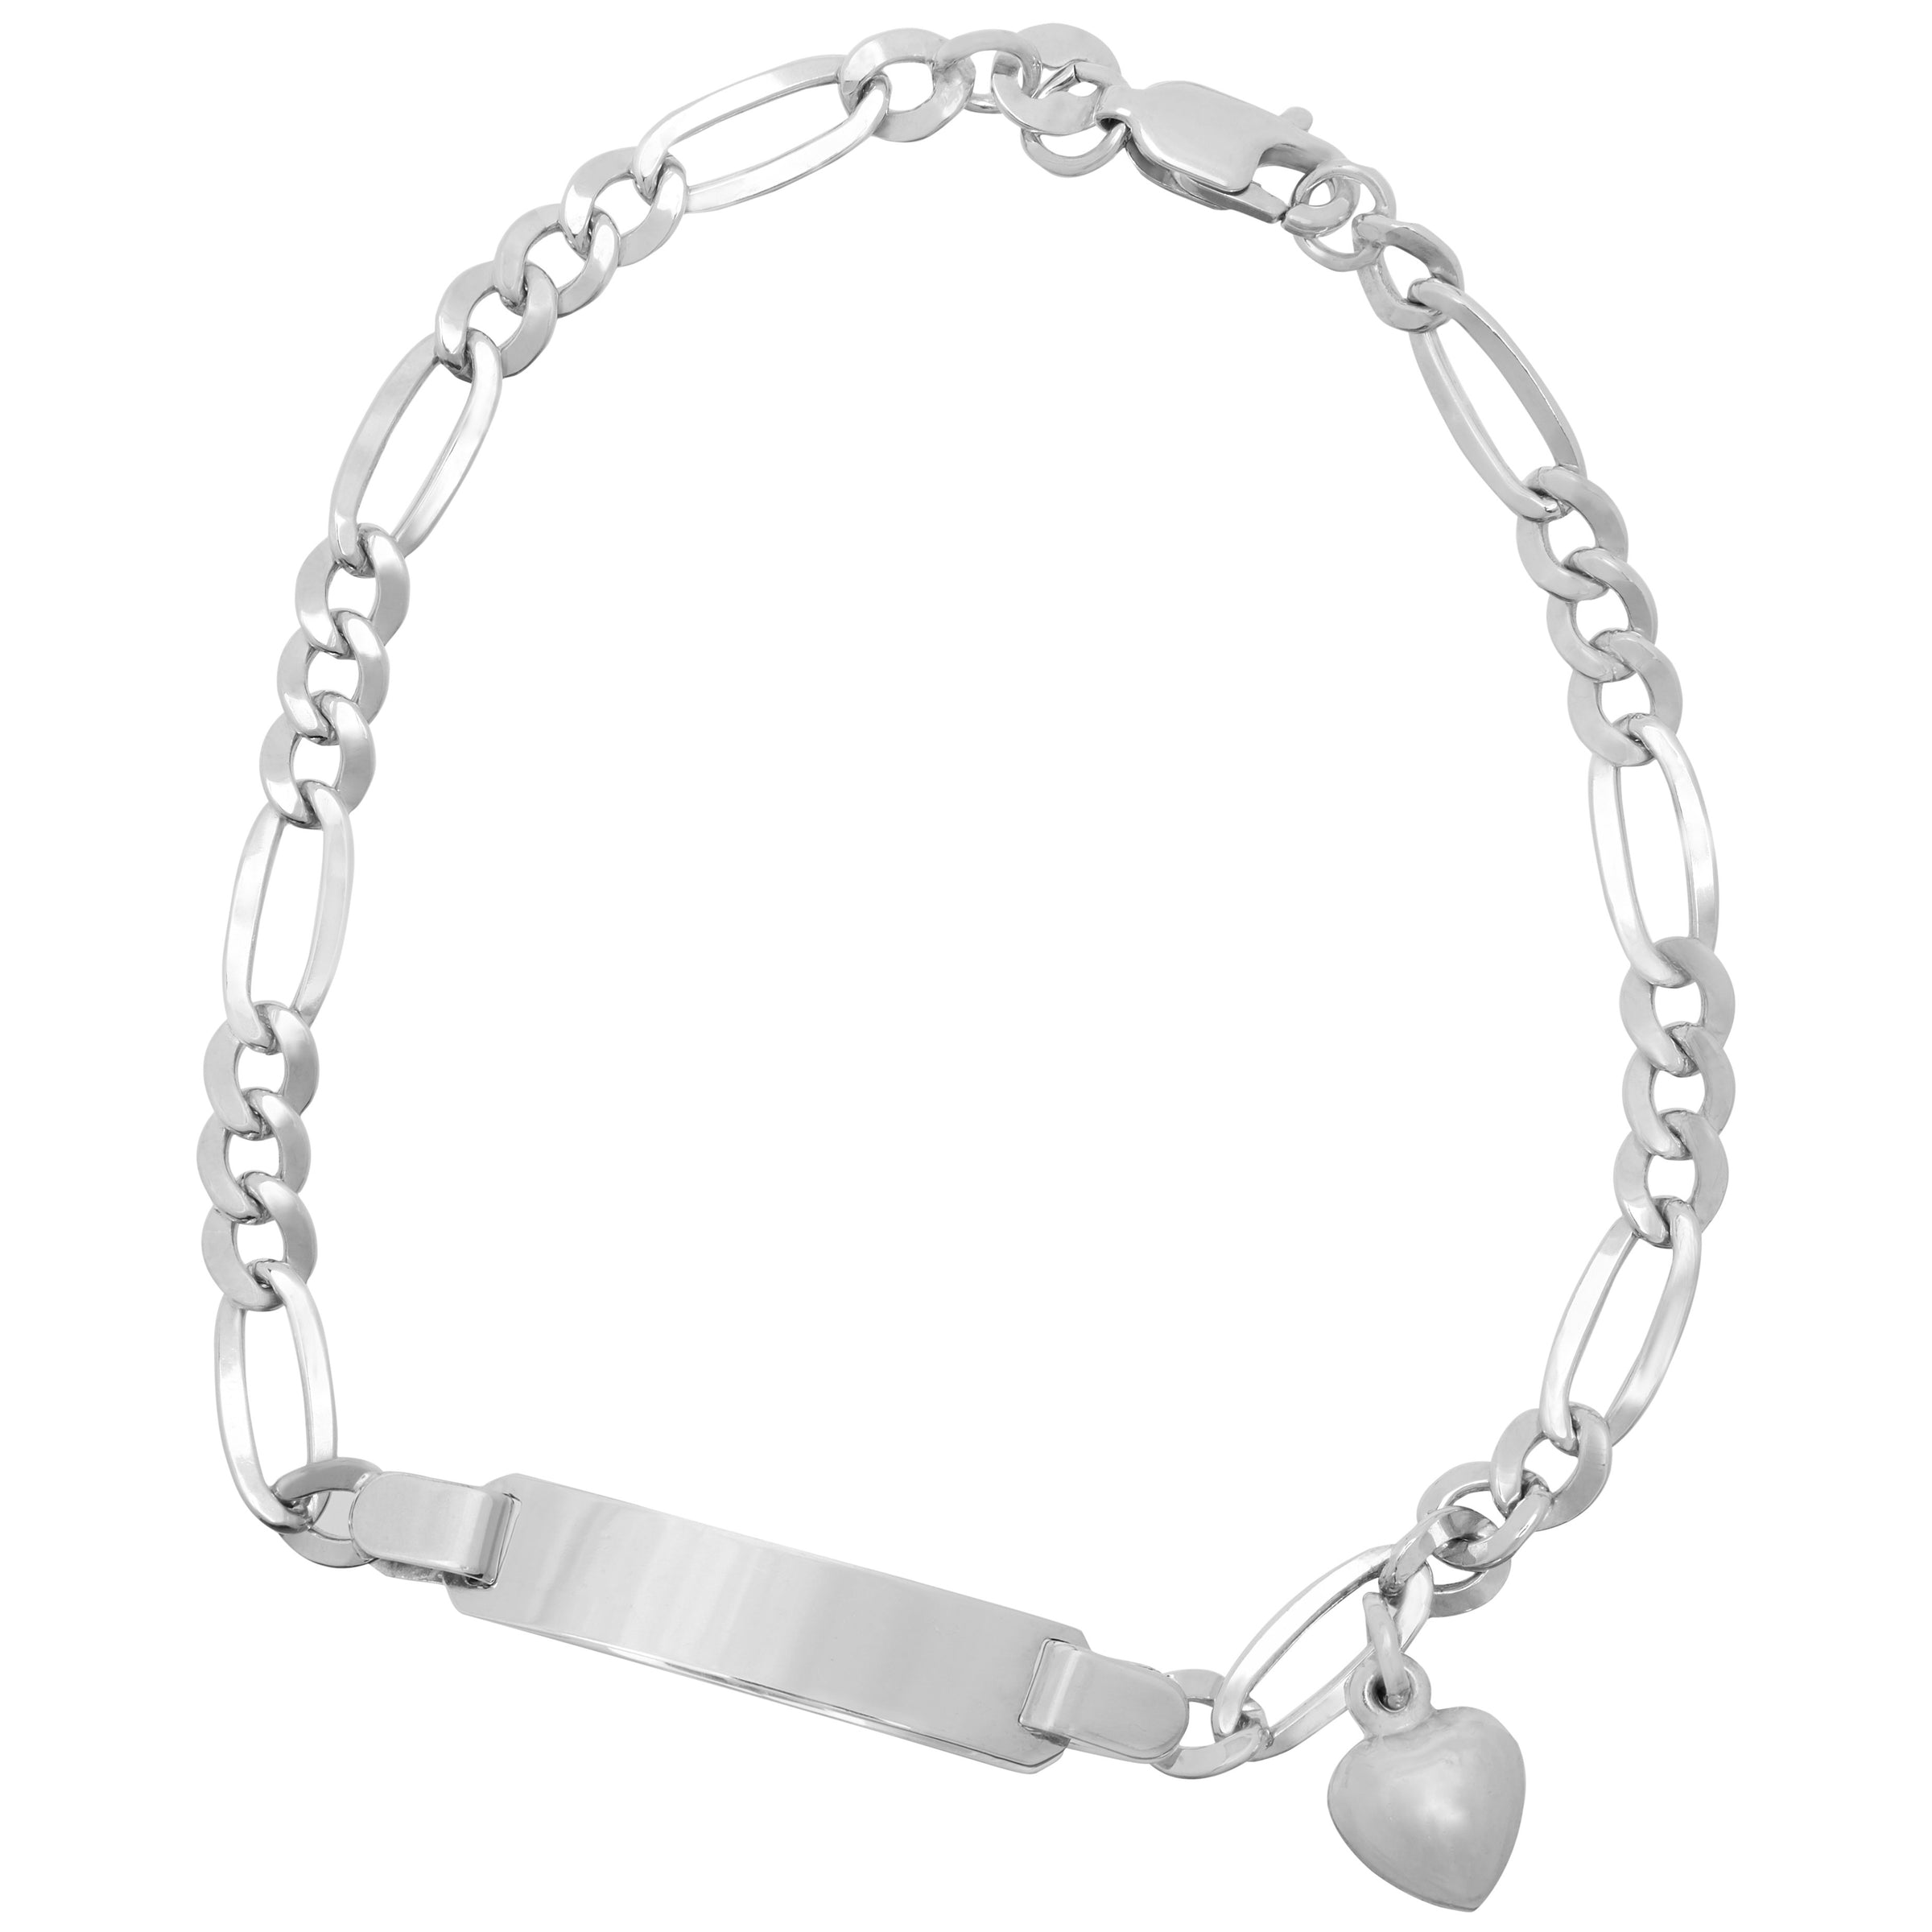 ID Bracelet with Heart Charm in 9ct White Gold Silver Infused Bracelets Bevilles 